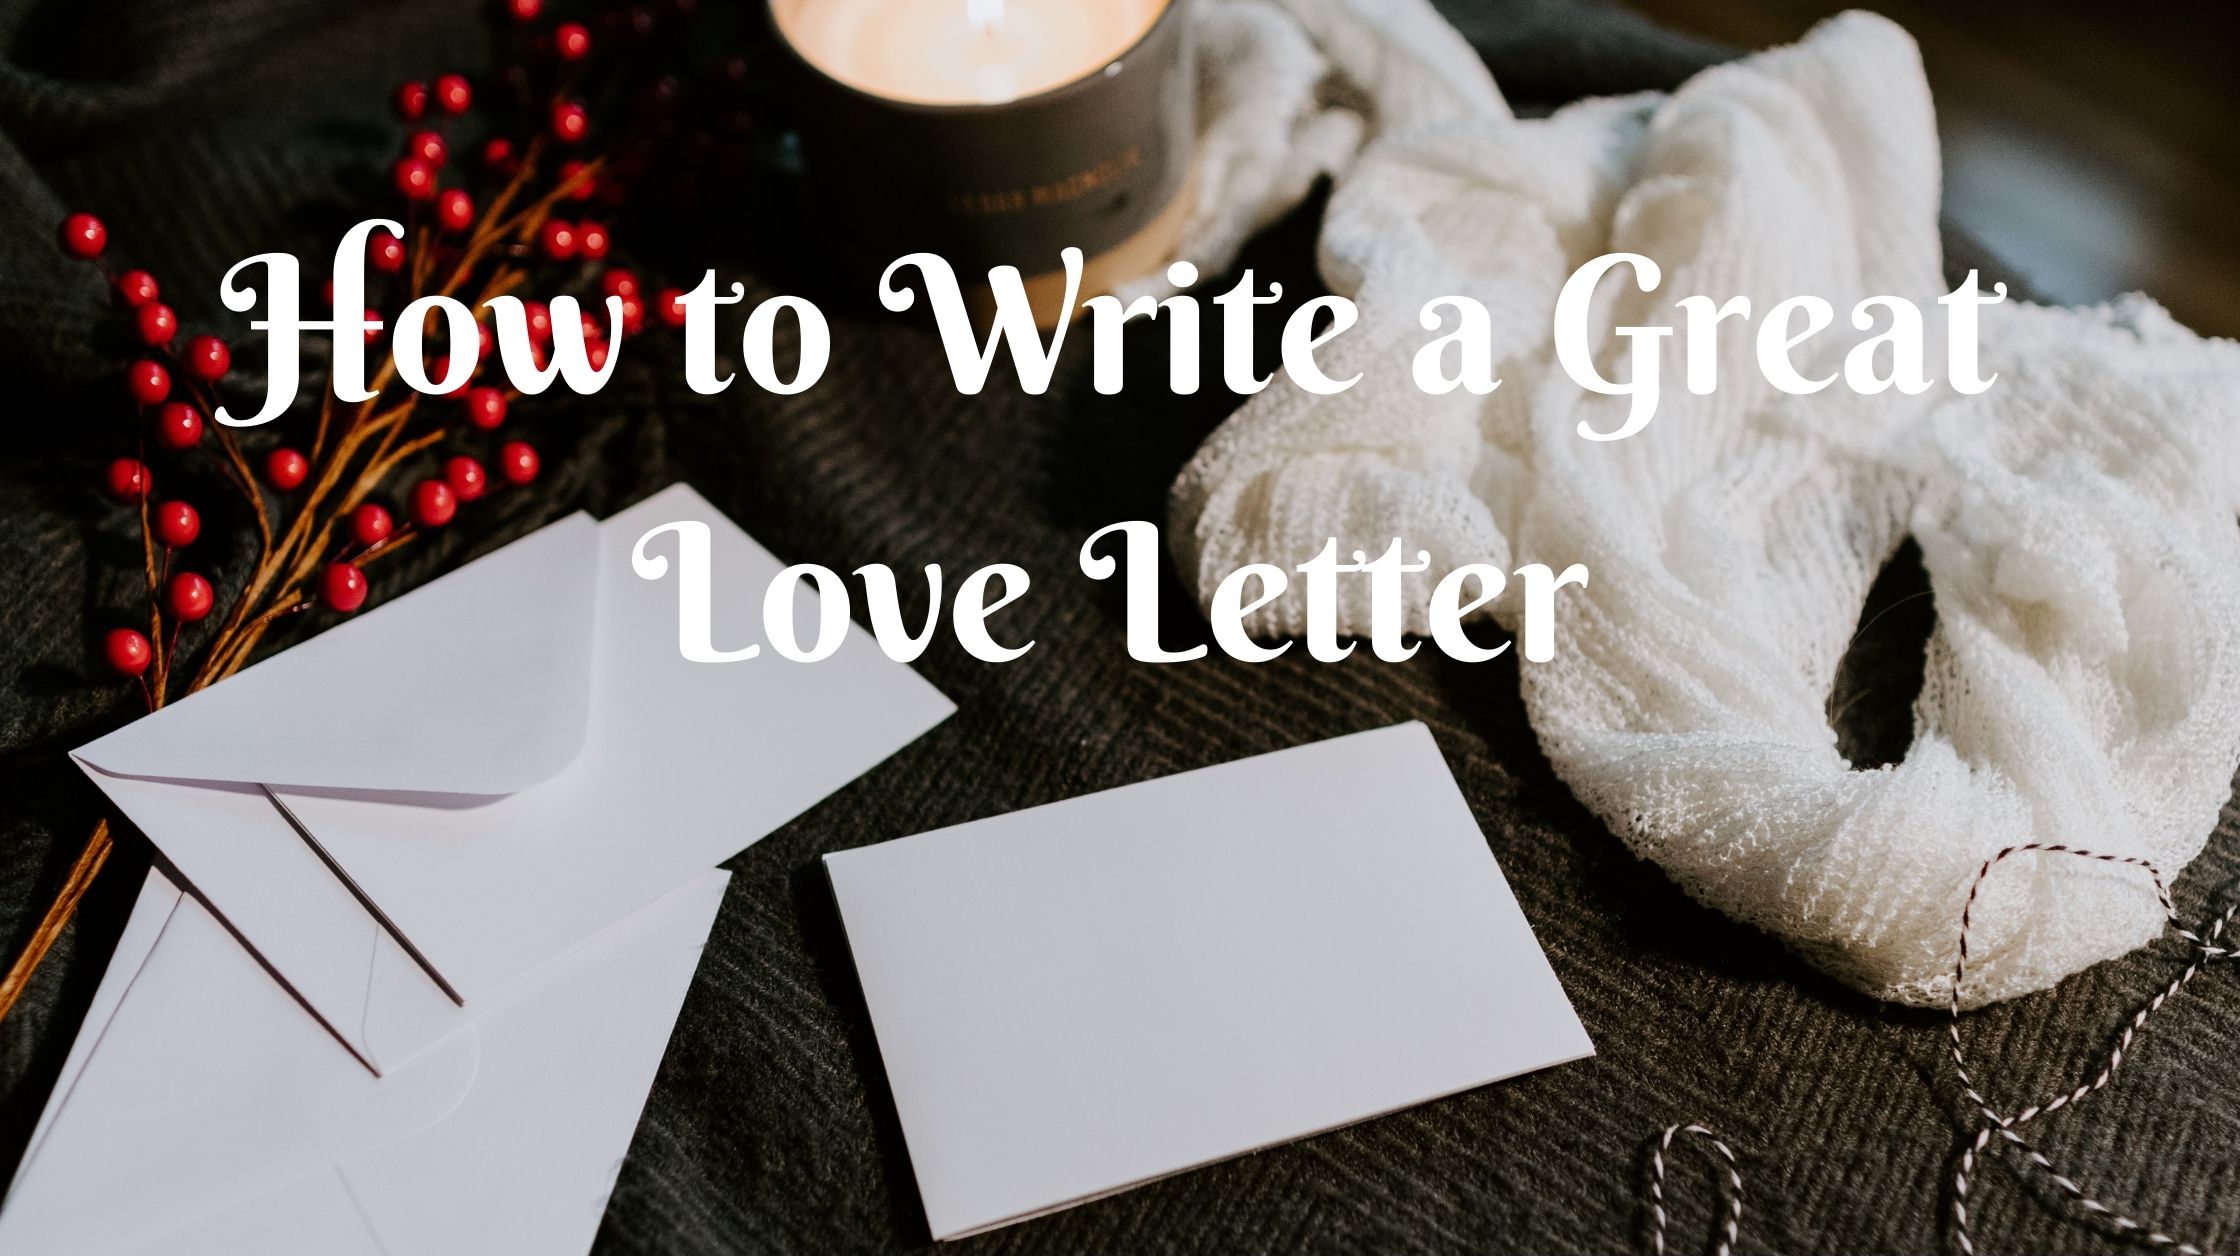 How to write a great love letter